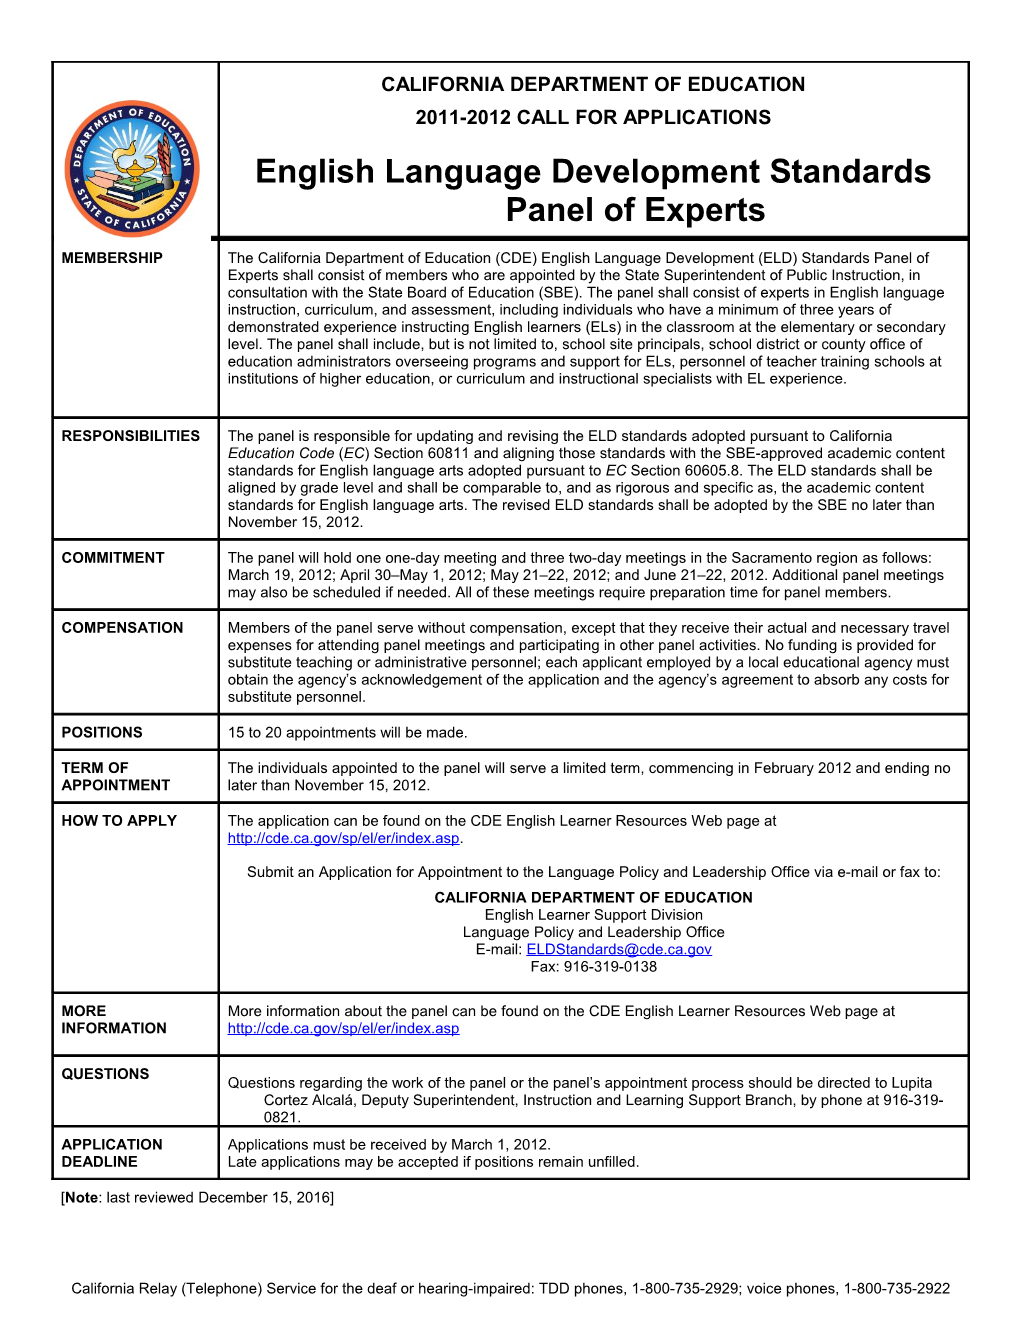 2011-12 Call for Applications - Letters (CA Dept of Education)